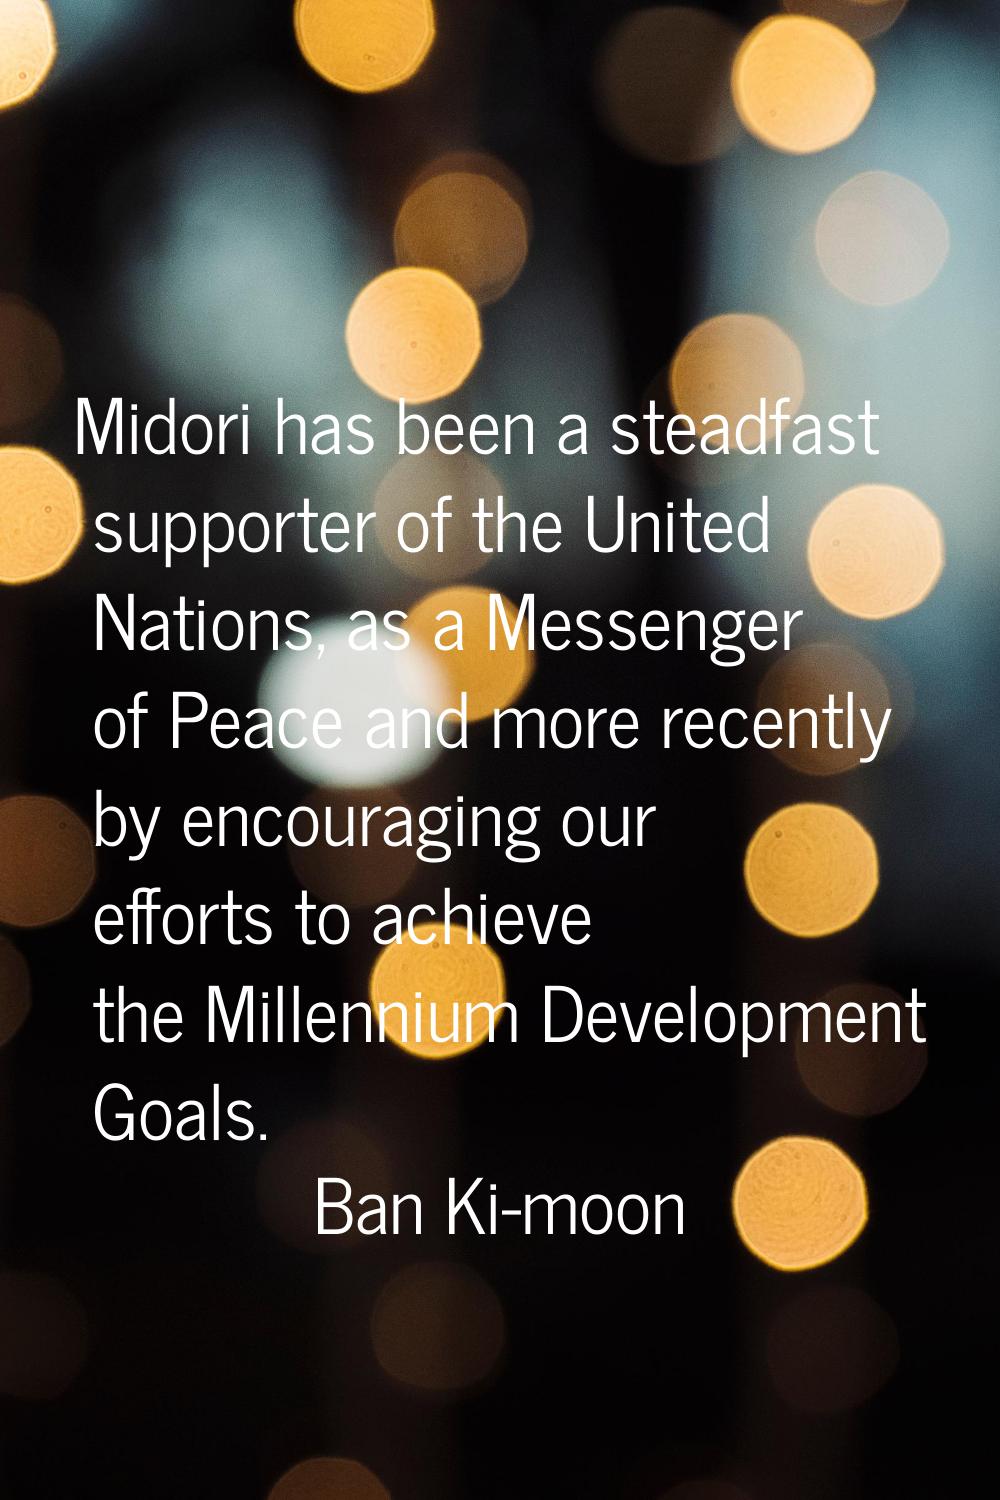 Midori has been a steadfast supporter of the United Nations, as a Messenger of Peace and more recen